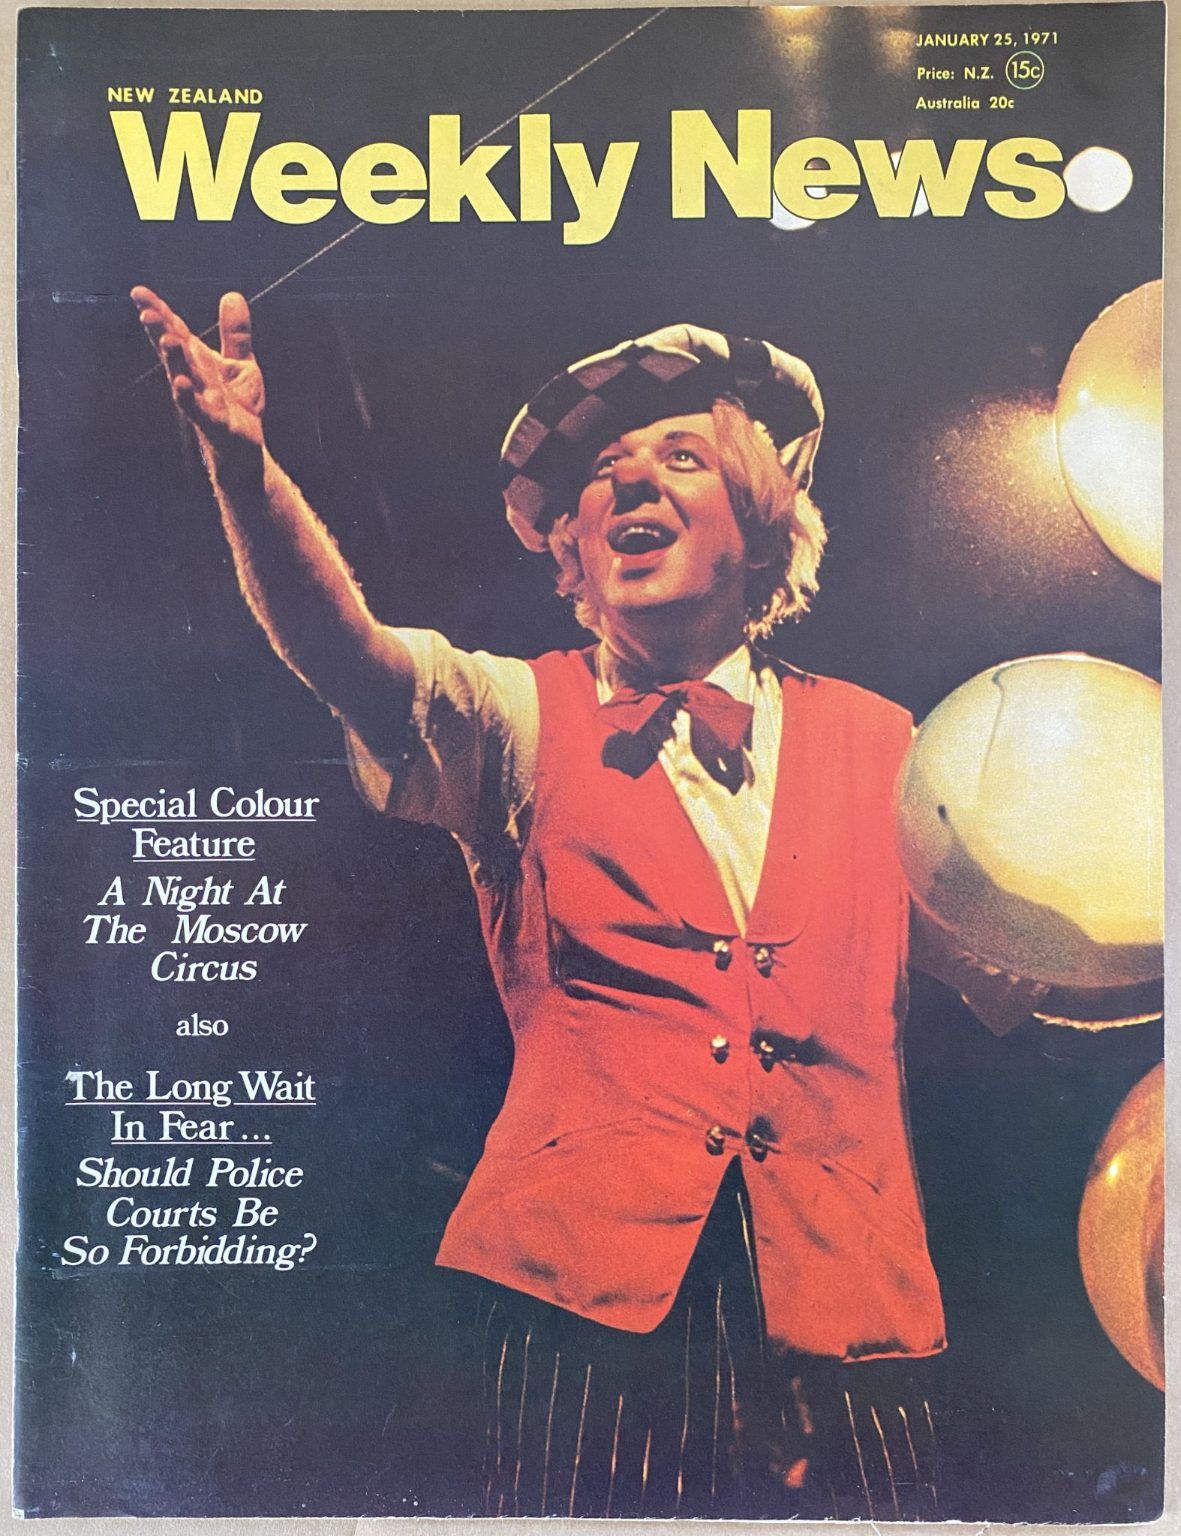 OLD NEWSPAPER: New Zealand Weekly News, No. 5590, 25 January 1971